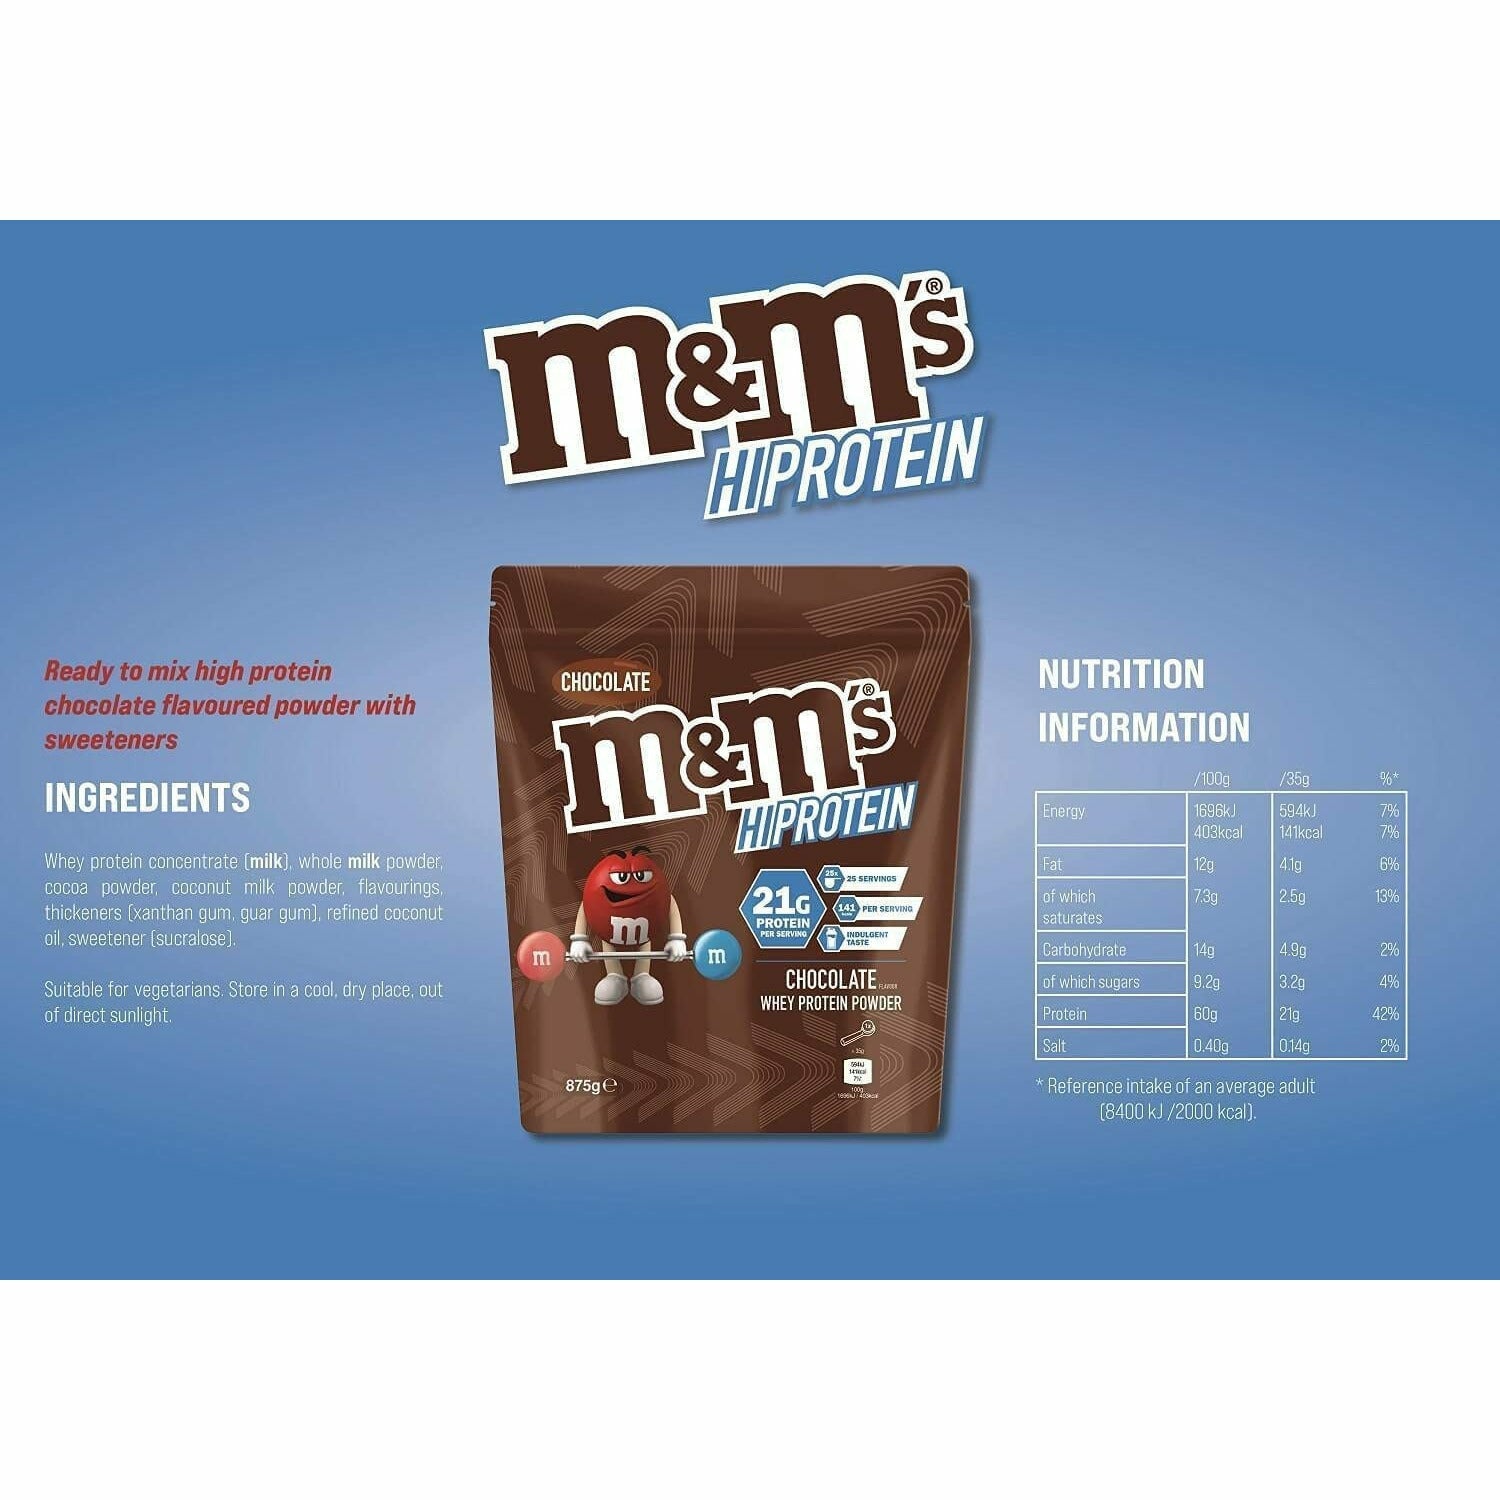 MARS Brand Hi Protein Whey Protein Powder (25 servings) Whey Protein M&M Chocolate BEST BY MARCH 04. 2023,Mars Chocolate & Caramel BEST BY DEC 23. 2022,Snickers Chocolate Caramel & Peanut,Twix Chocolate Biscuit & Caramel,Bounty BEST BY OCT 14. 2022,Maltesers BEST BY JULY 22, 2022,Snickers WHITE Chocolate Caramel & Peanut BEST BY SEPT 28, 2022 HiProtein